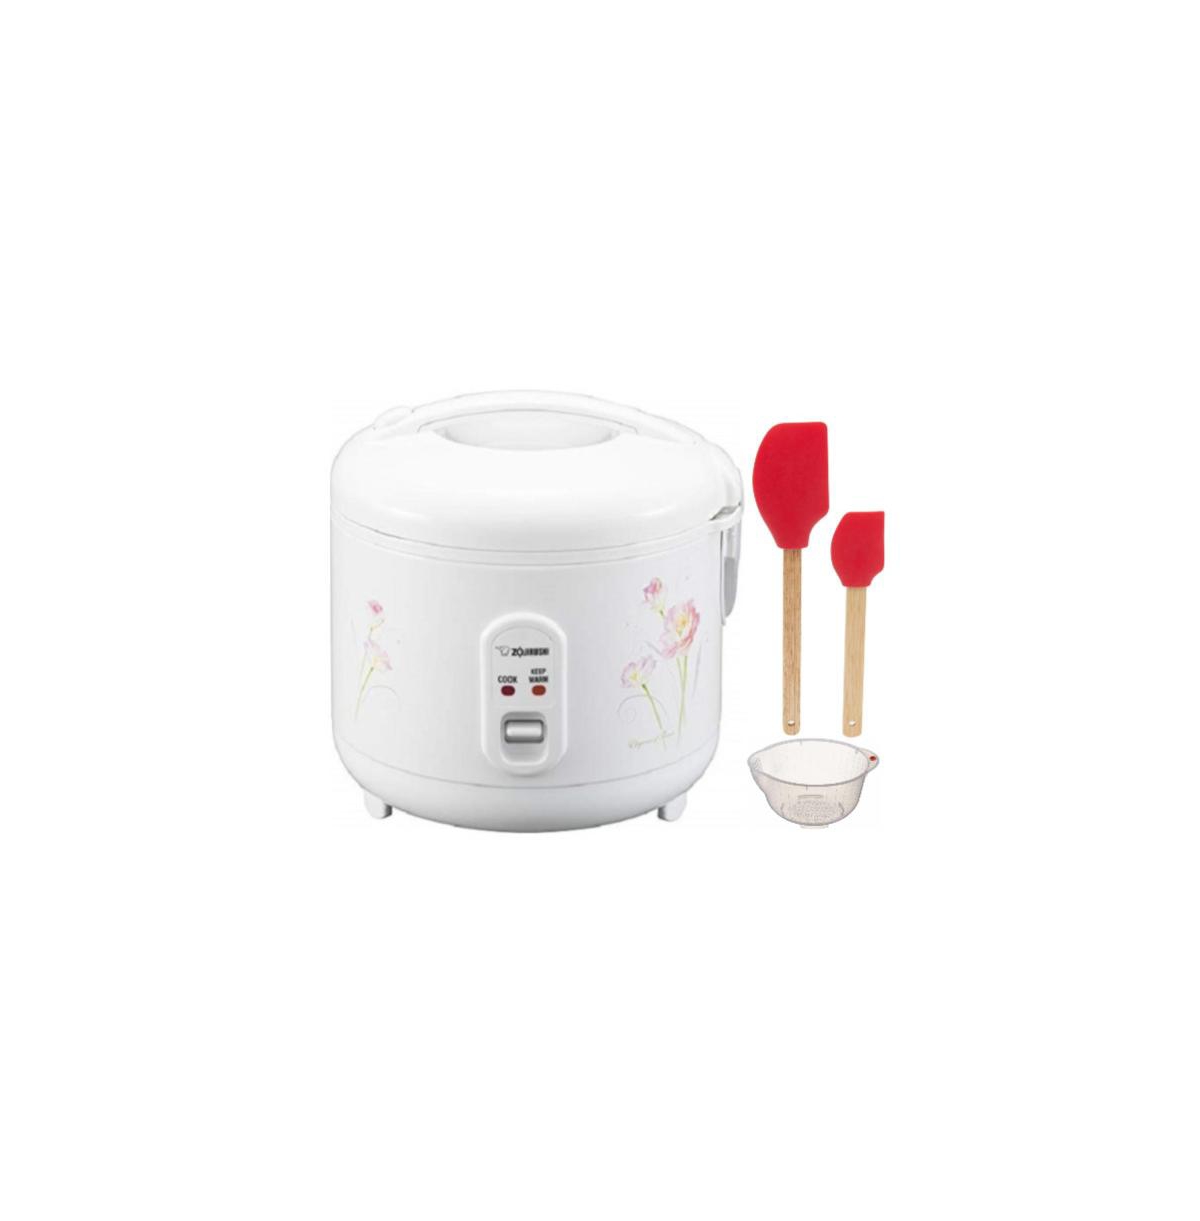 Ns-RPC10 Rice Cooker and Warmer (1.0-Liter, Tulip) Bundle - White